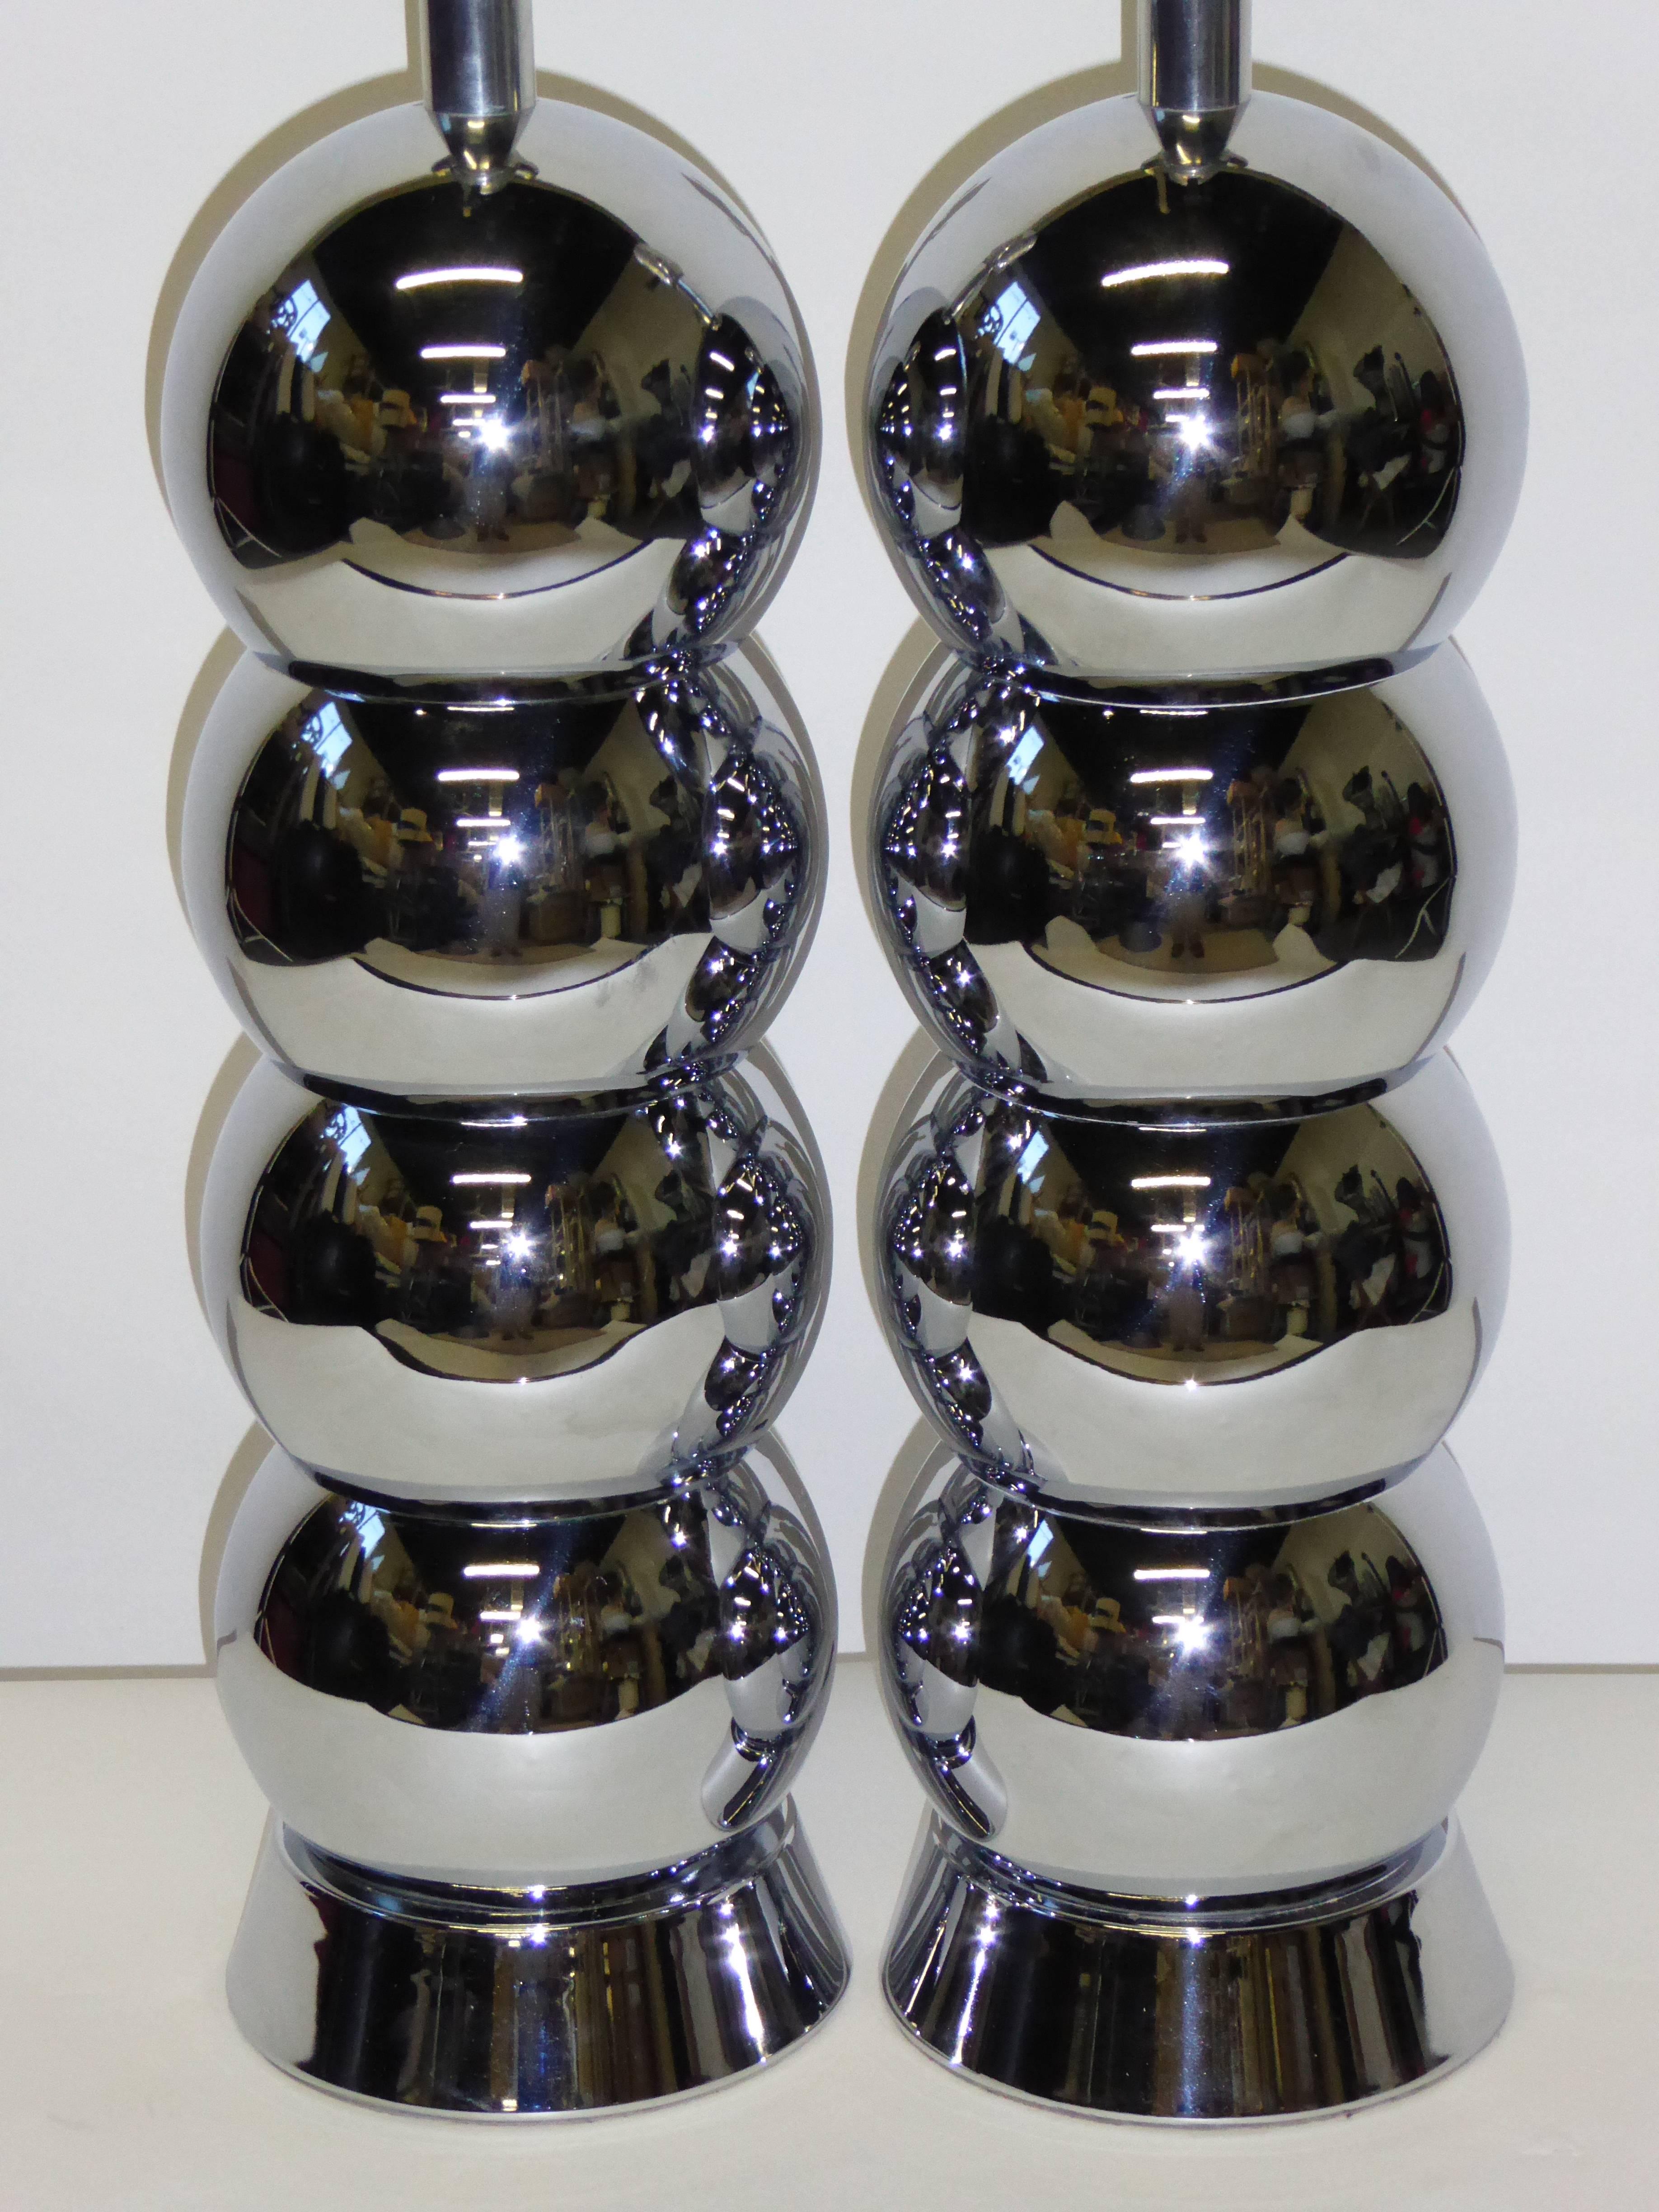 An iconic mid century design by George Kovacs, this pair of stacked chrome ball lamps are architectural and inviting.  In excellent condition with original metallic textural cone shades if desired.  Three level sockets.

Price is for the